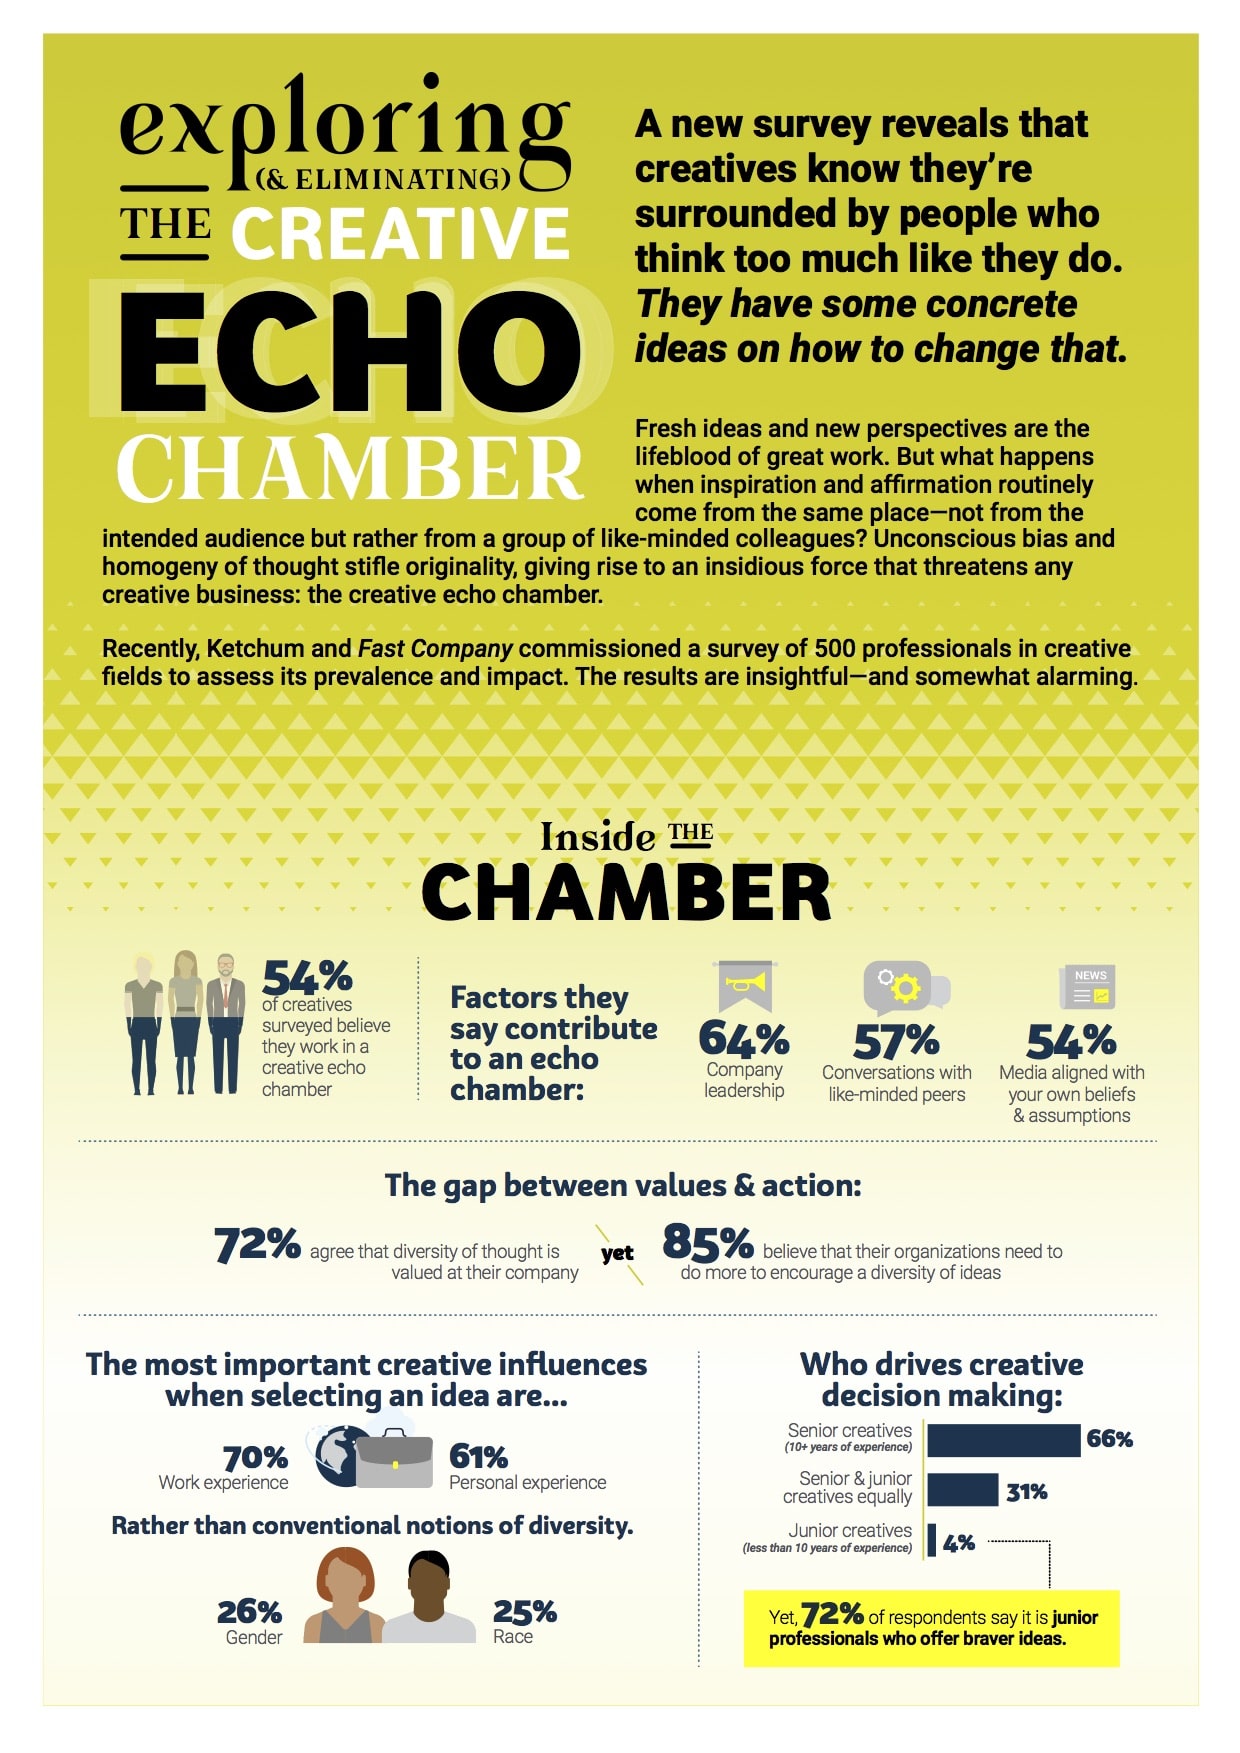 Are creative professionals trapped in an echo chamber?